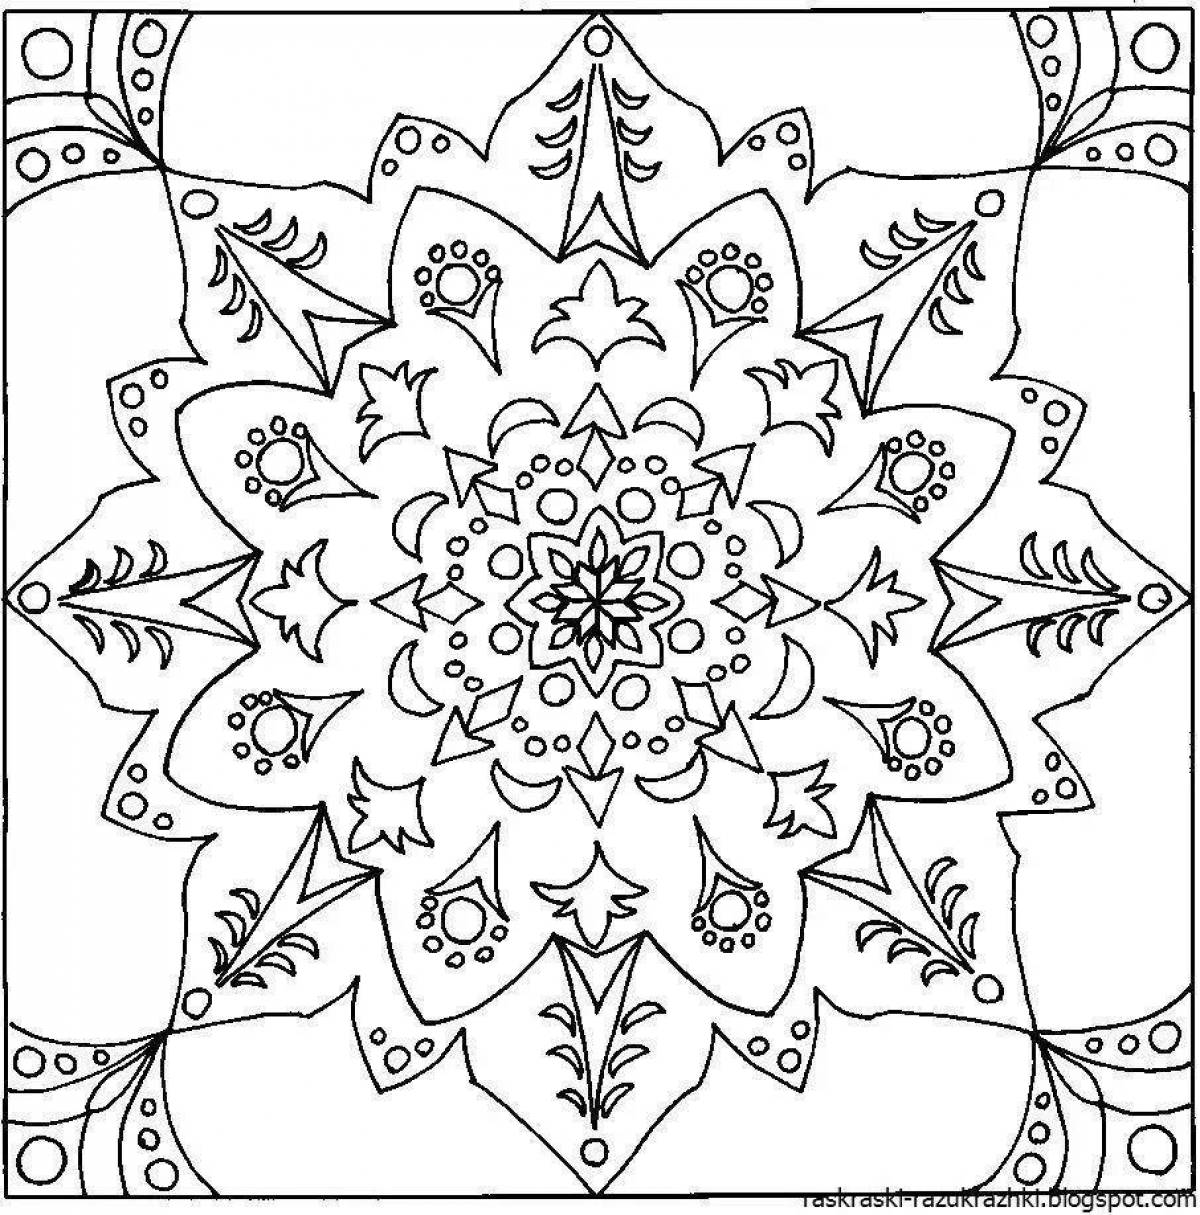 Bright Pavloposad scarf coloring book for children